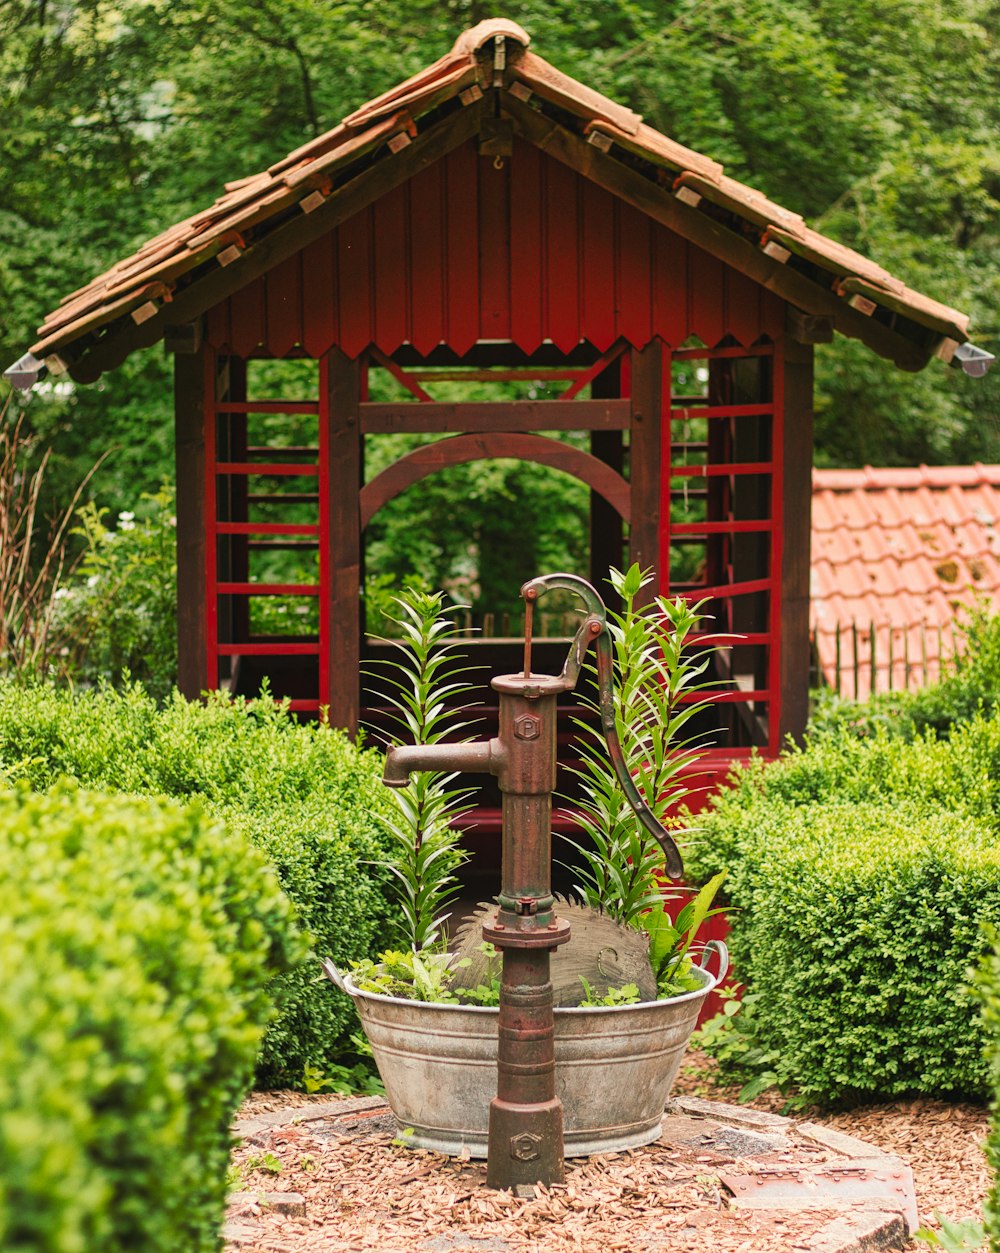 a water fountain in a garden with a gazebo in the background